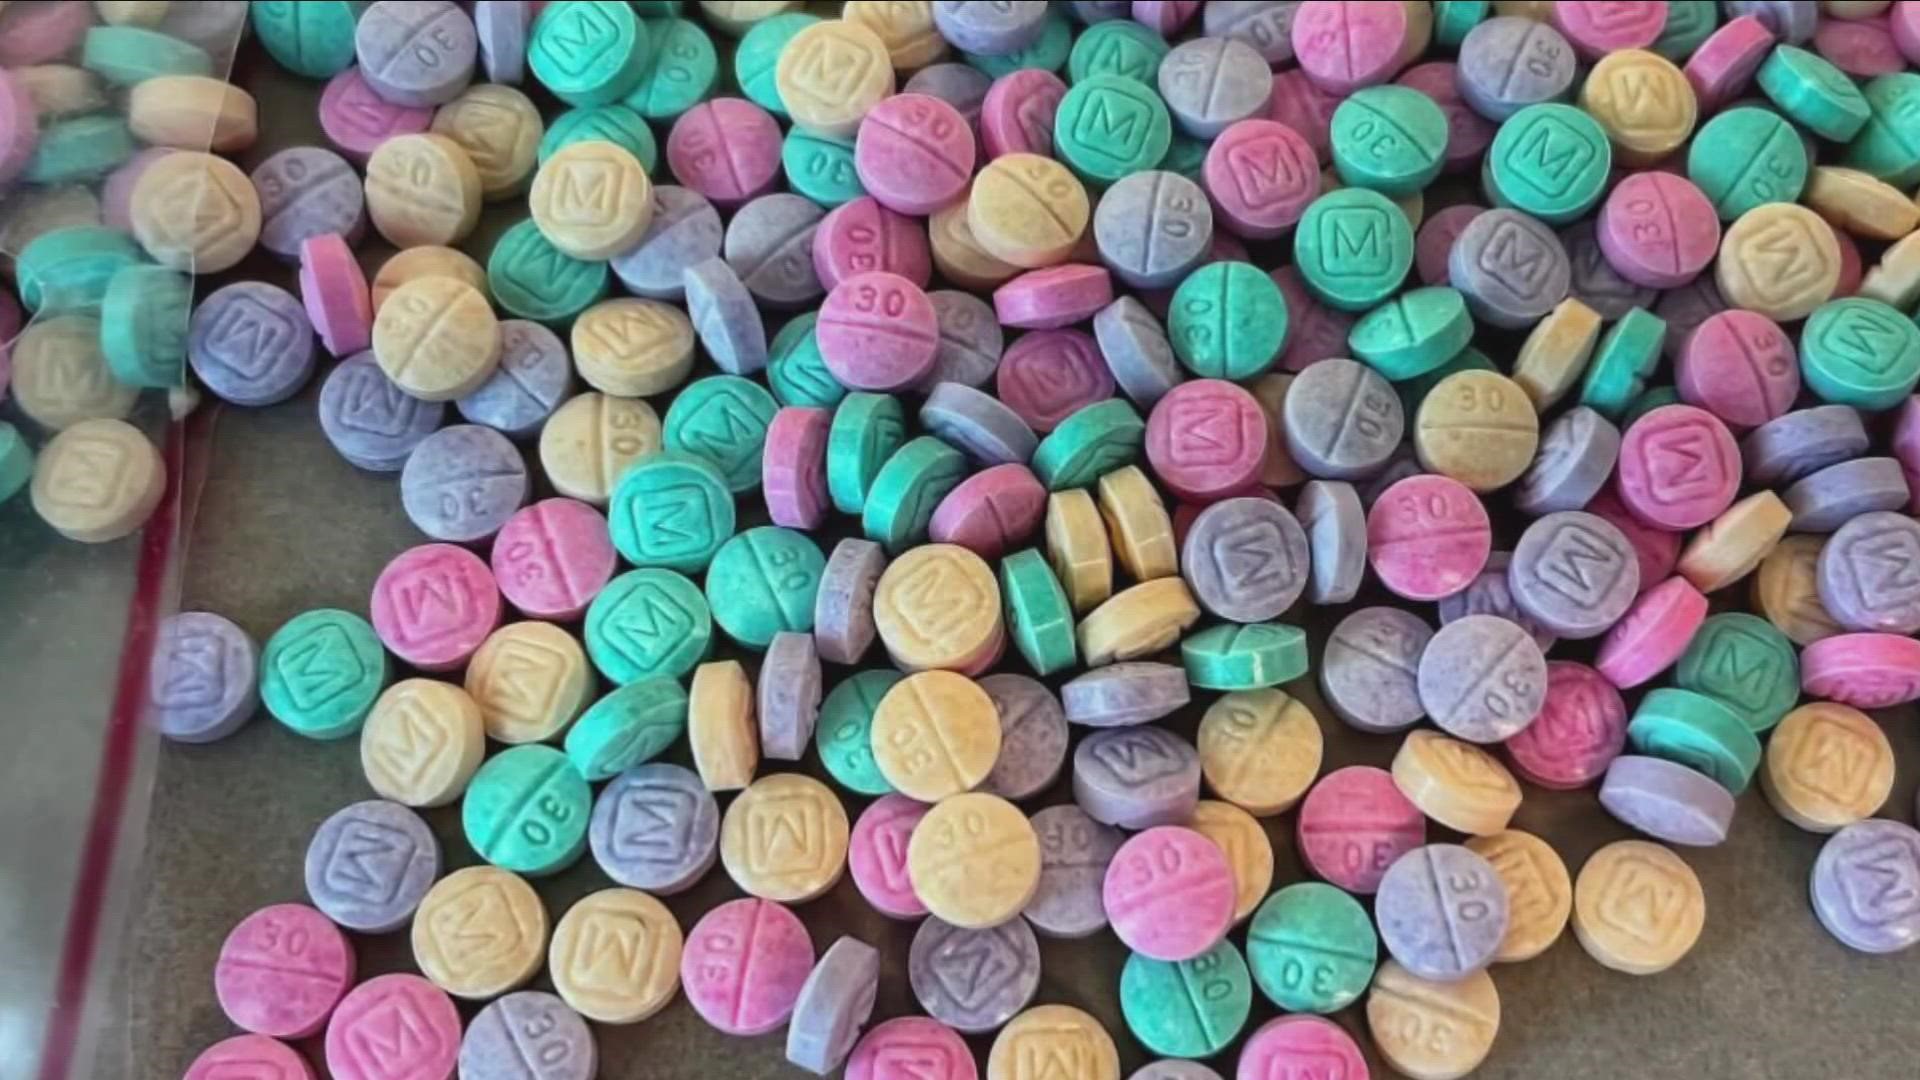 Our local health officials have previously warned anyone who may consider using illicit drugs about the so-called rainbow fentanyl - laced pills resembling candy